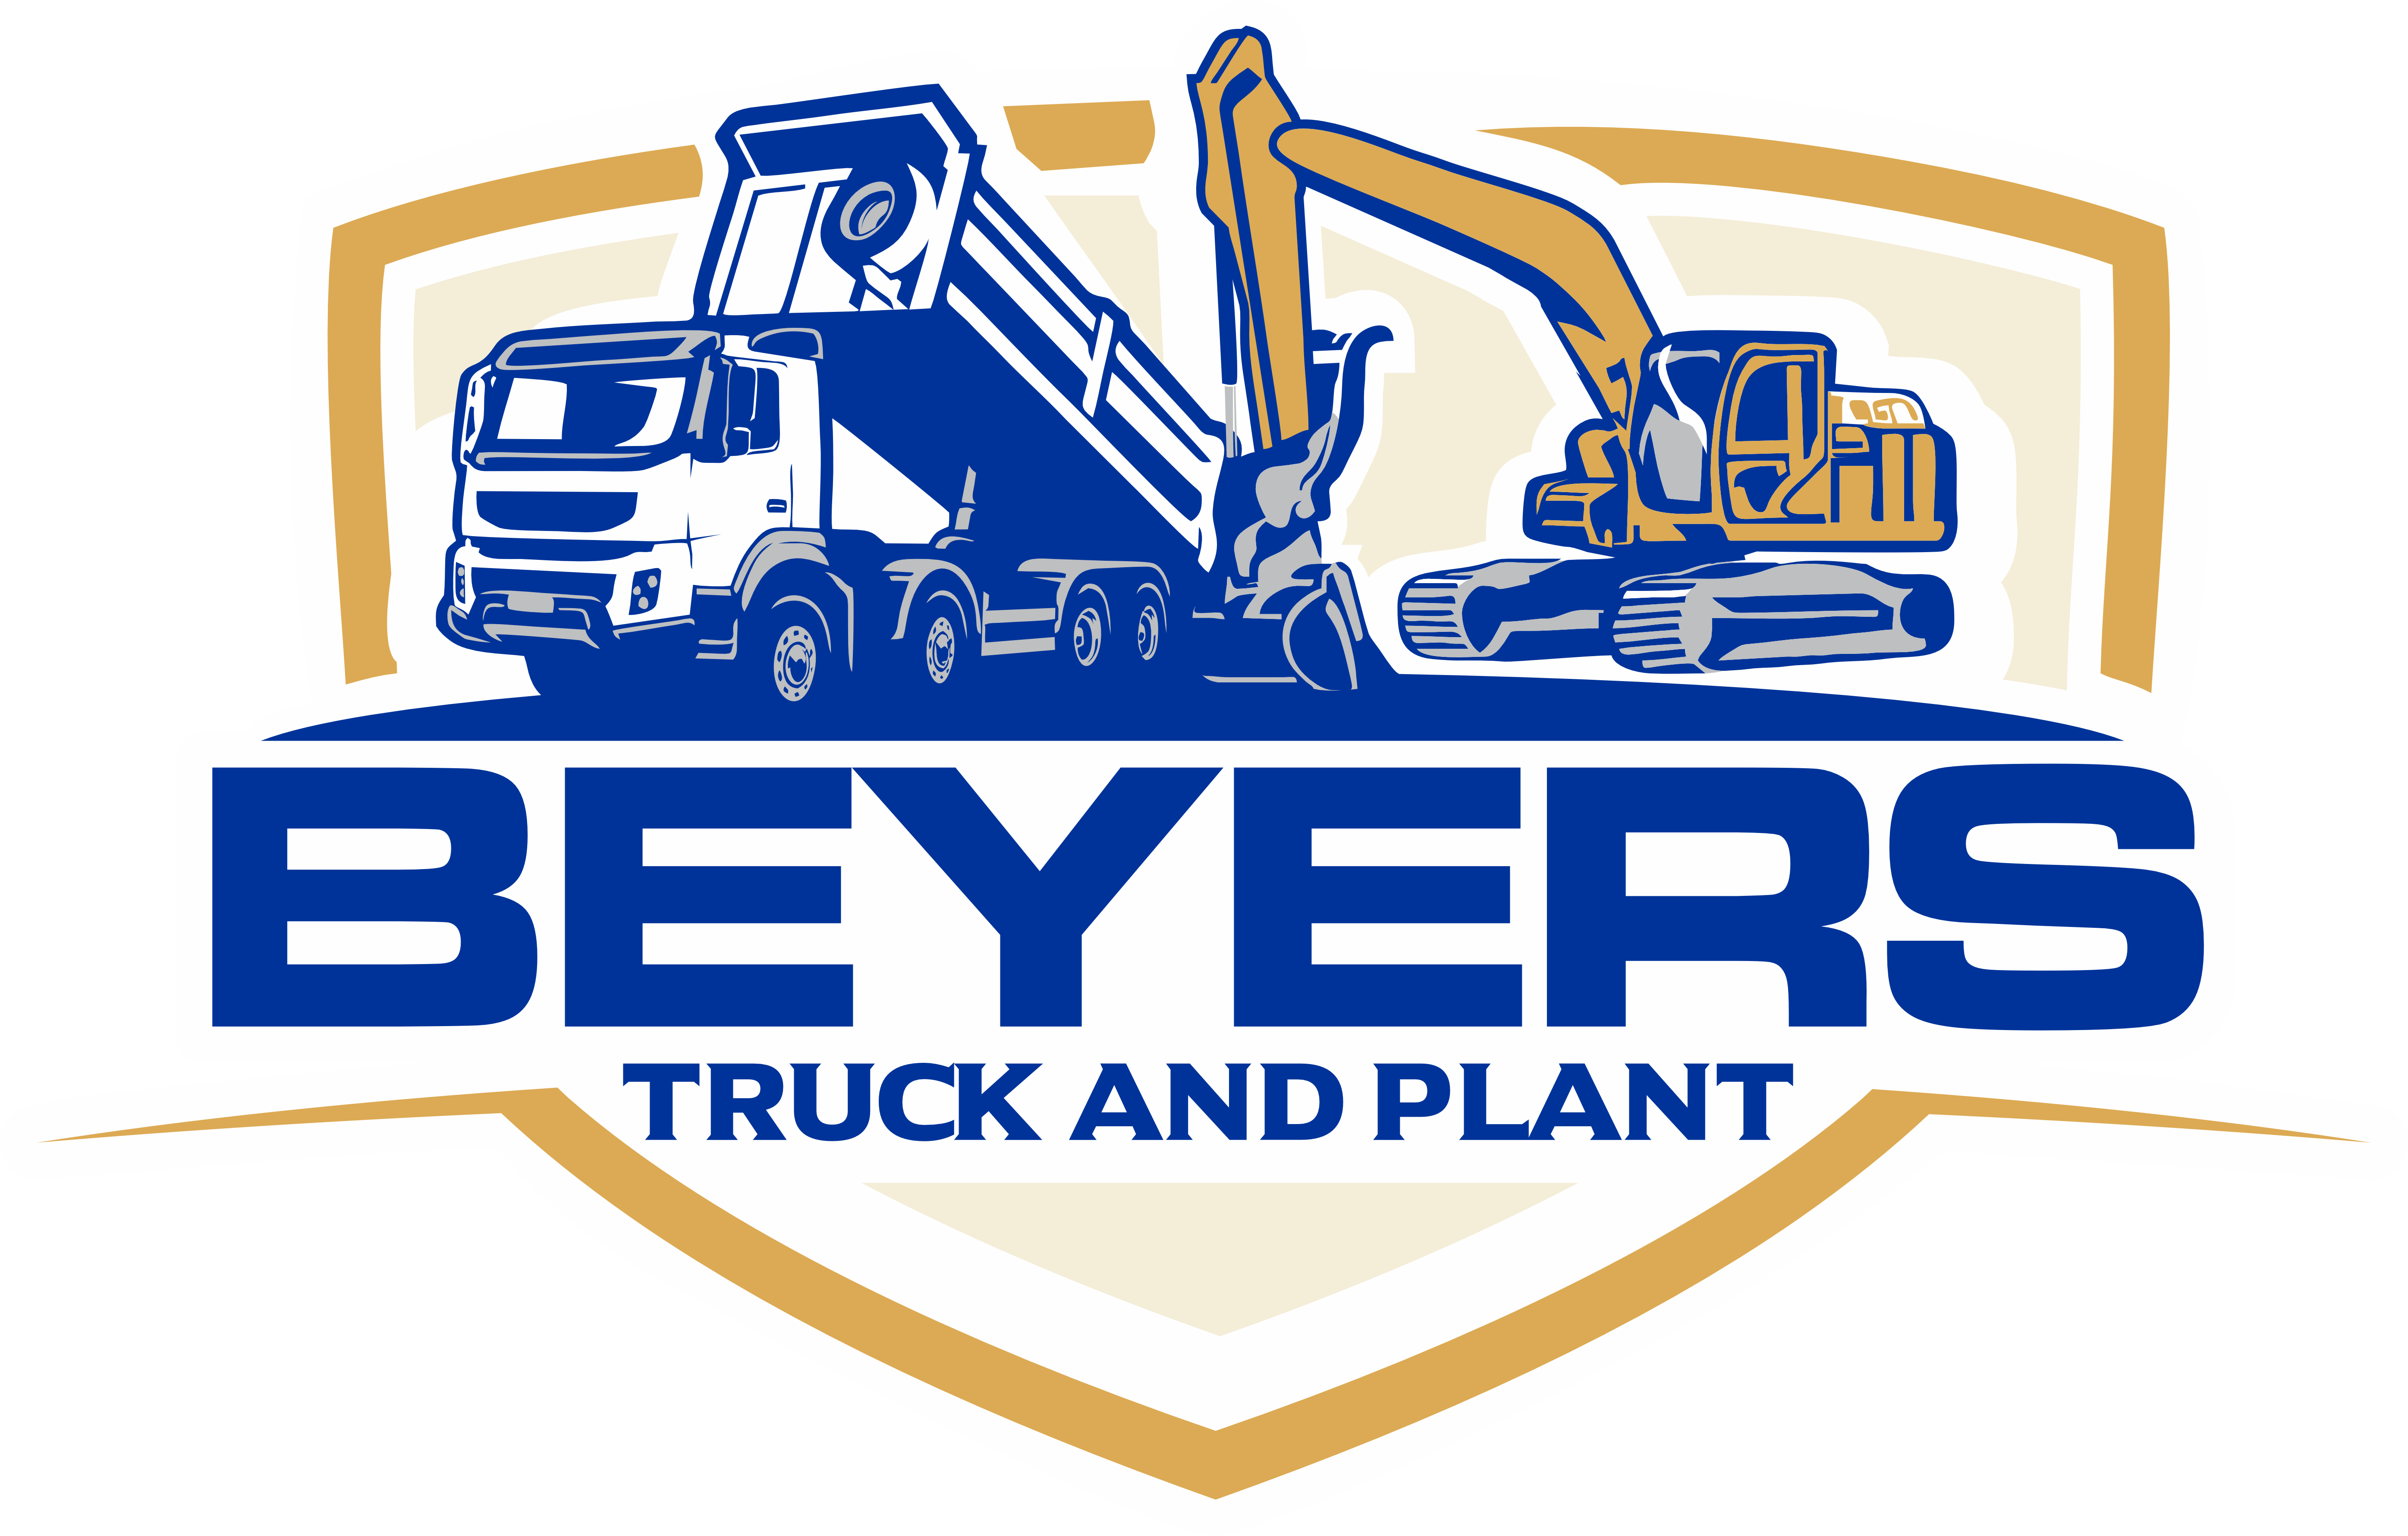 Beyers Truck and Plant